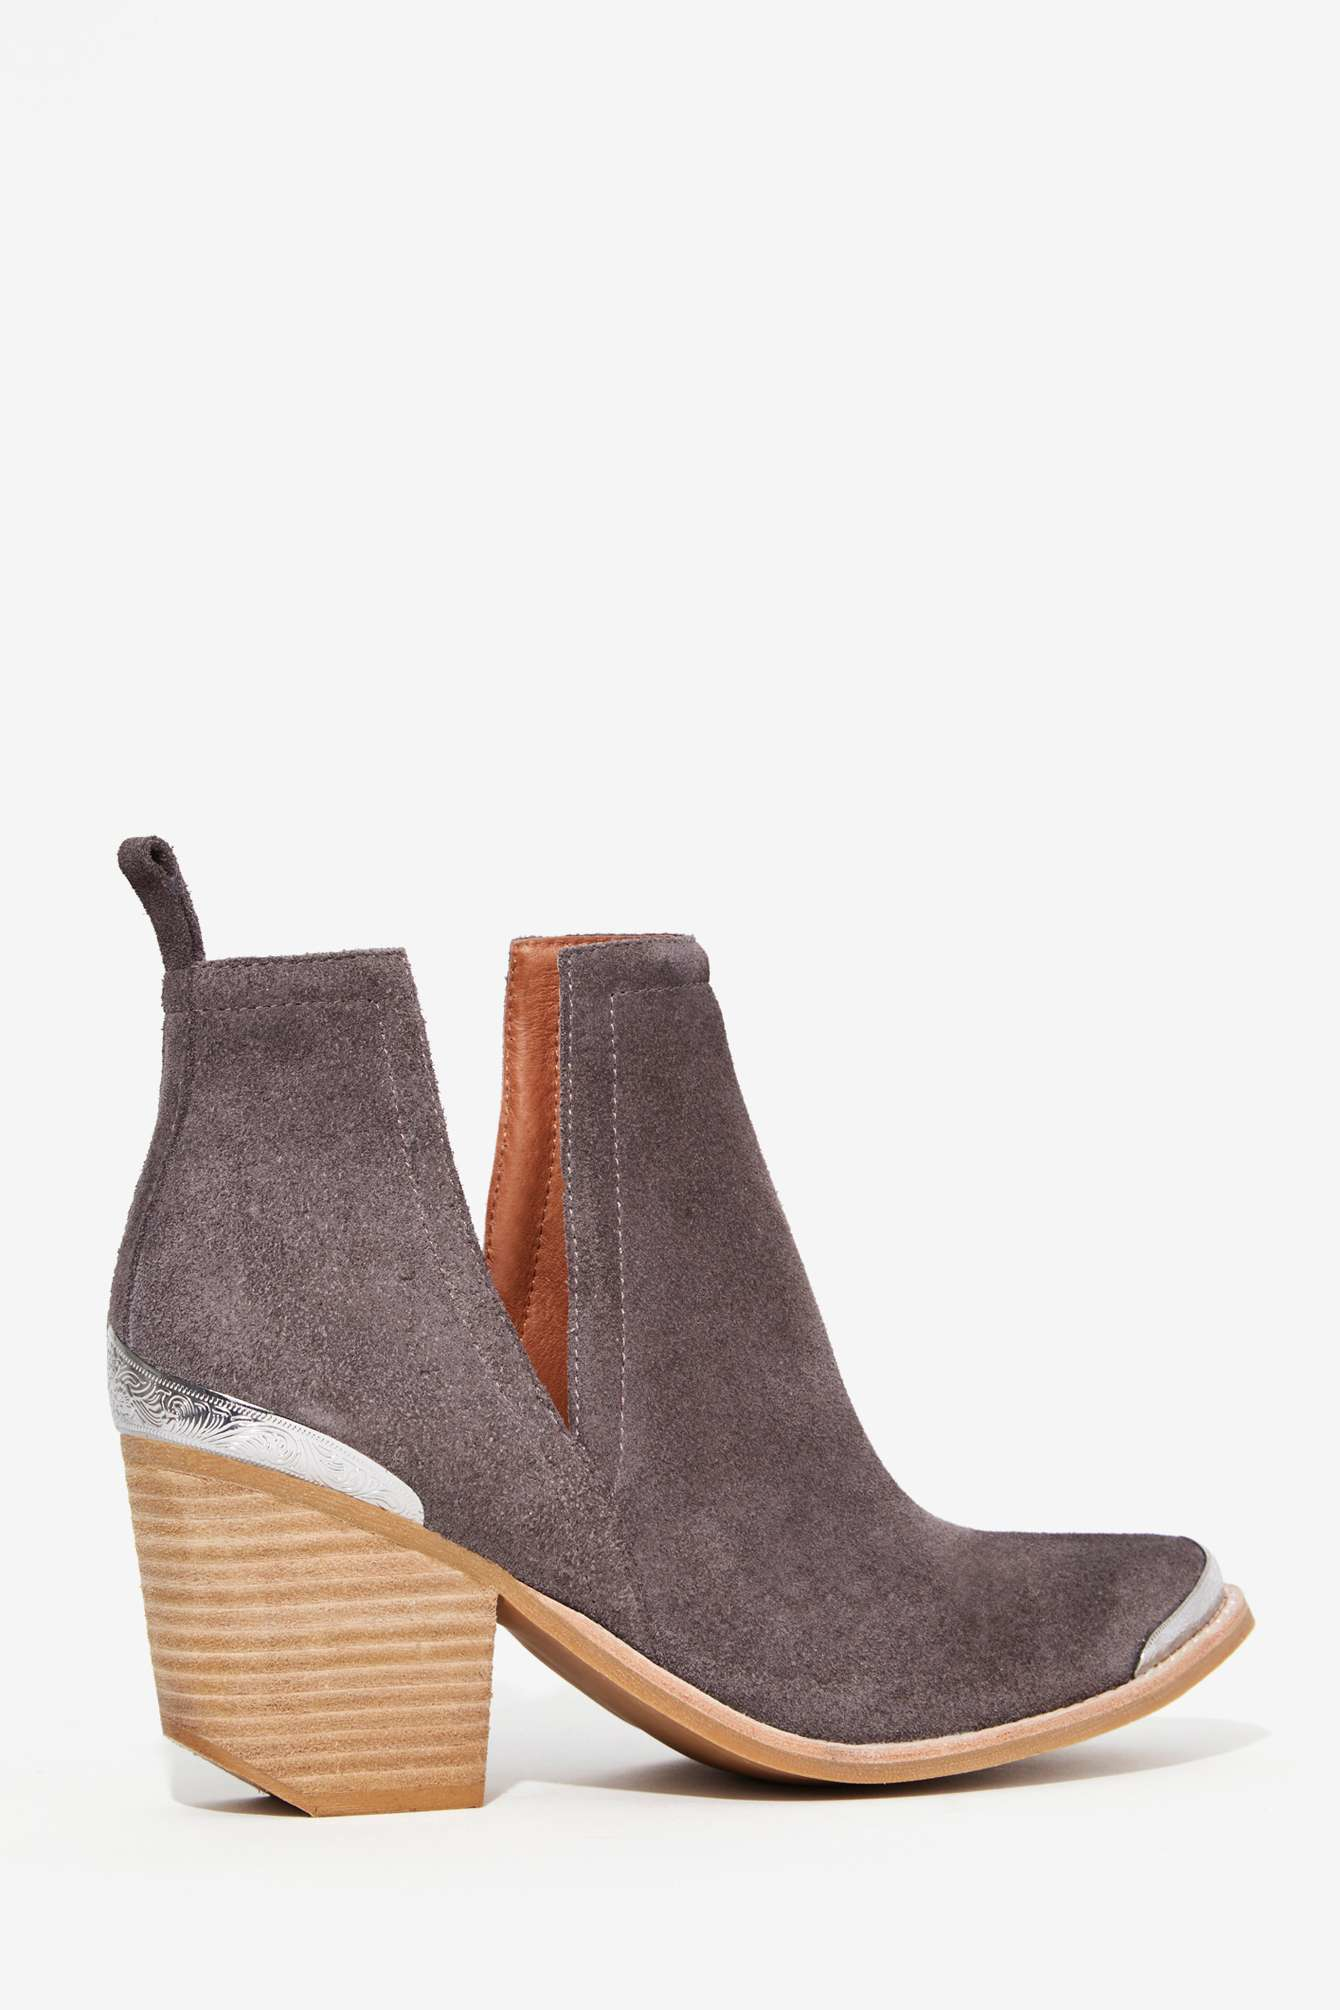 Lyst - Jeffrey Campbell Cromwell Suede Bootie - Gray in Gray